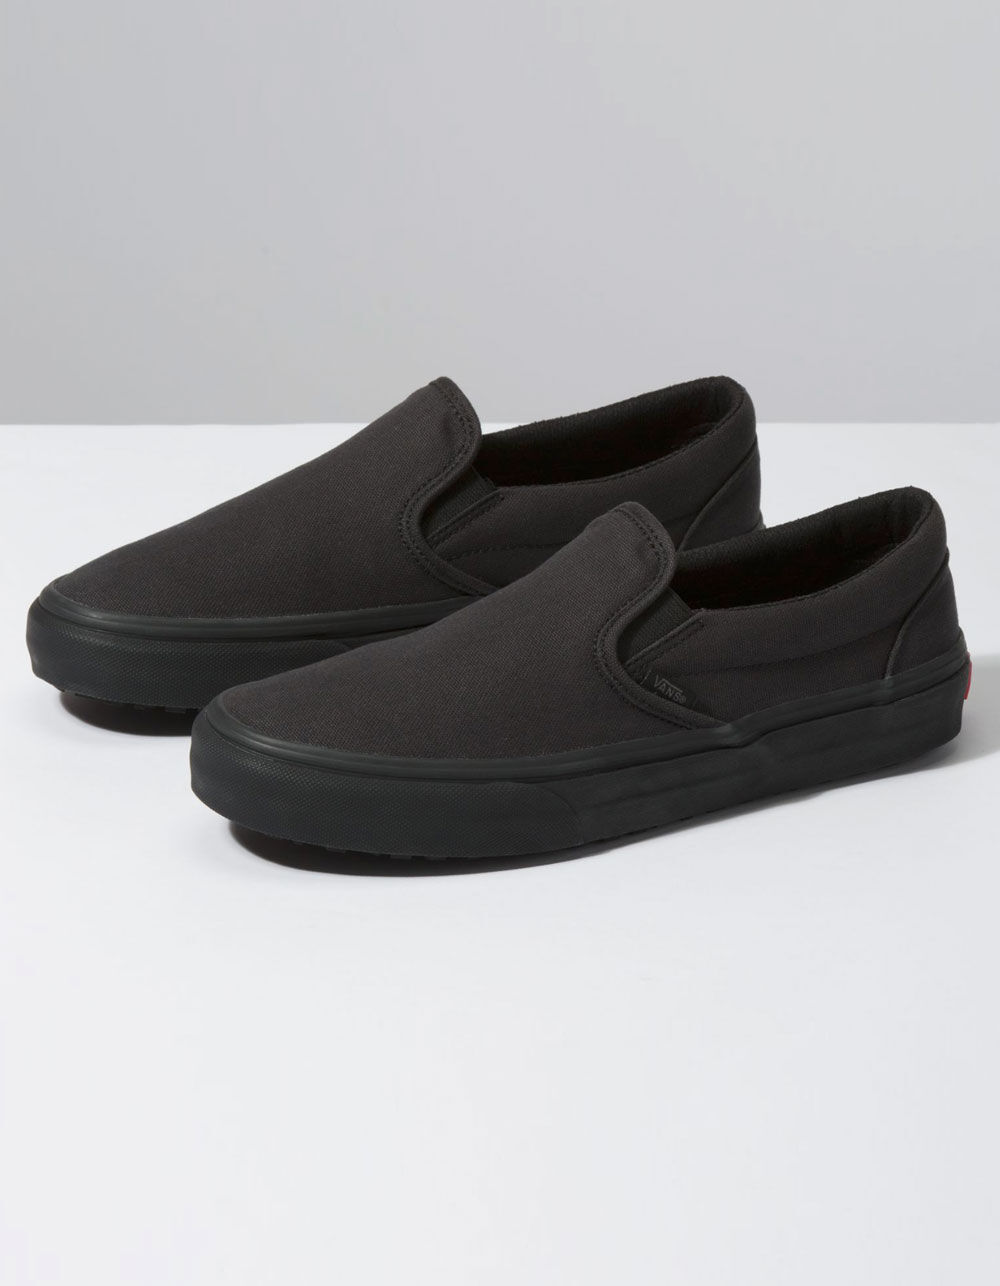 VANS Made For The Makers Classic Slip-On Black & Black Shoes - BLACK ...